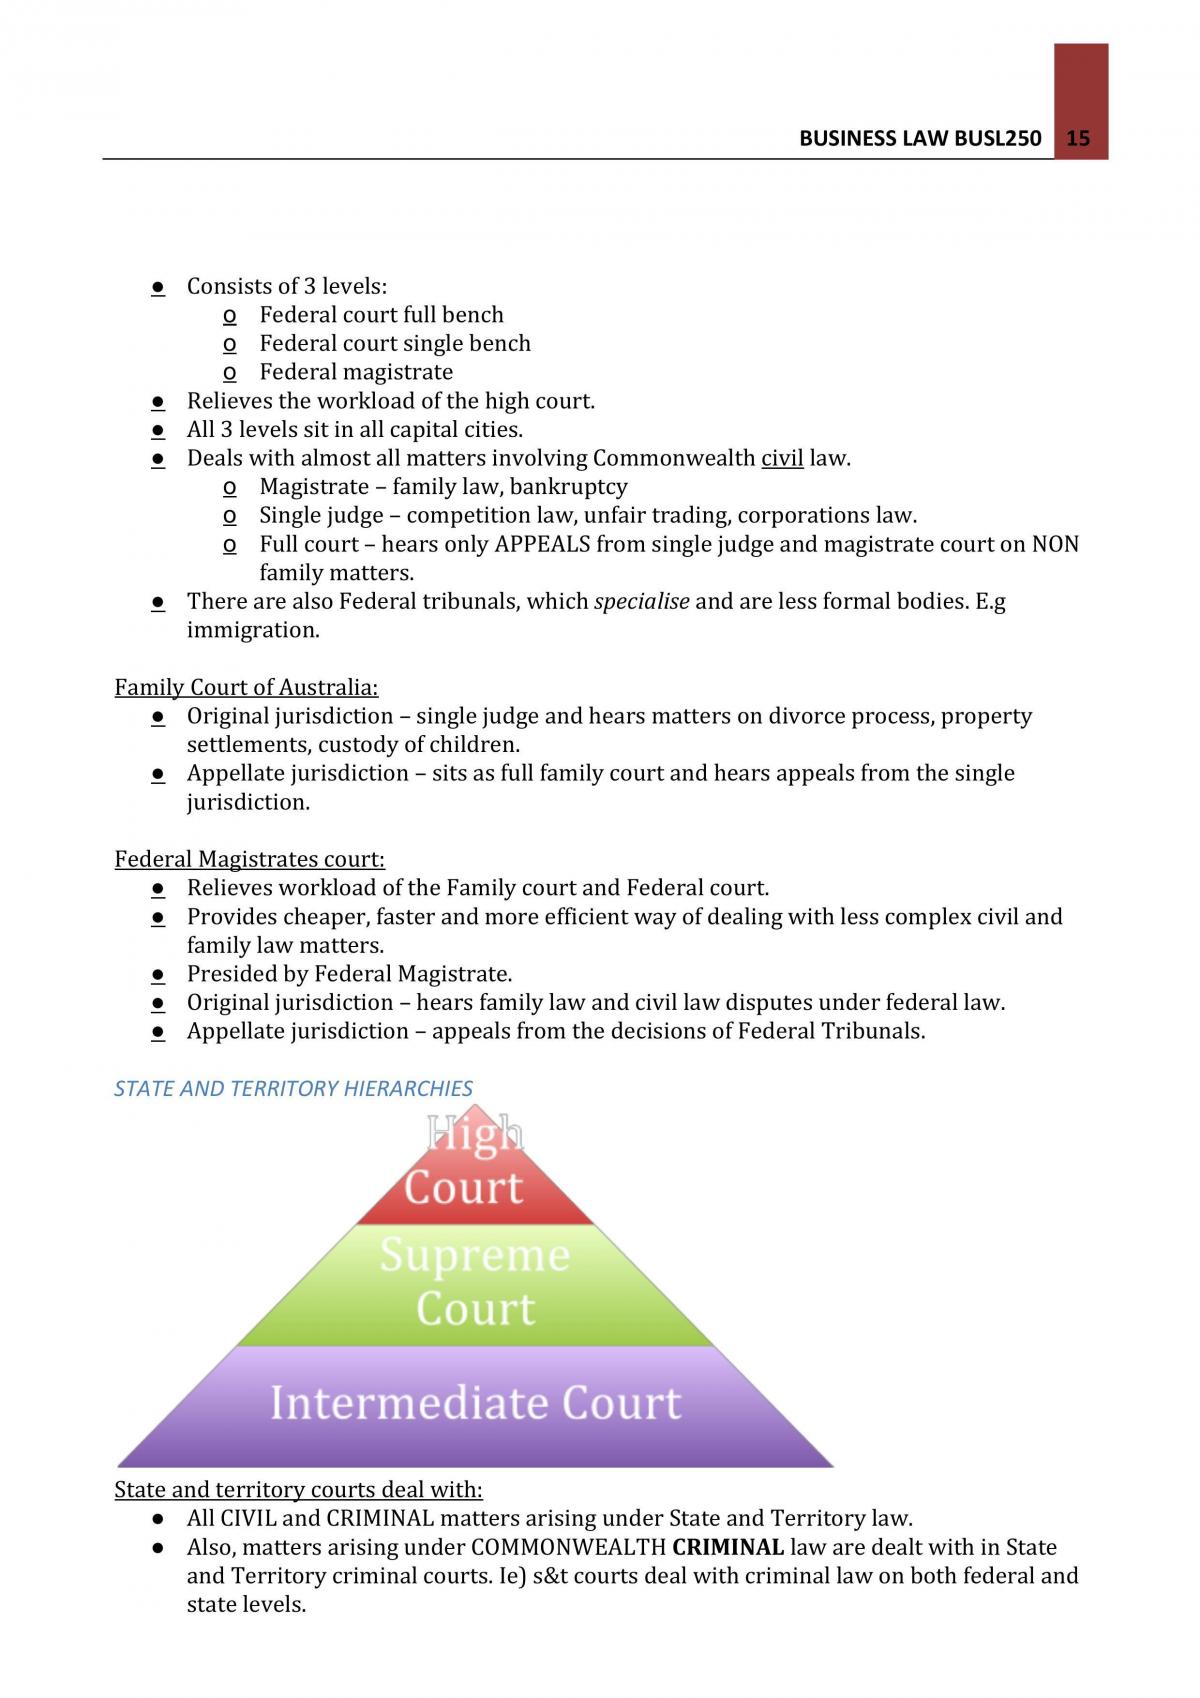 Intro to Business Law Chapter 1 - Australian Legal System - Page 15